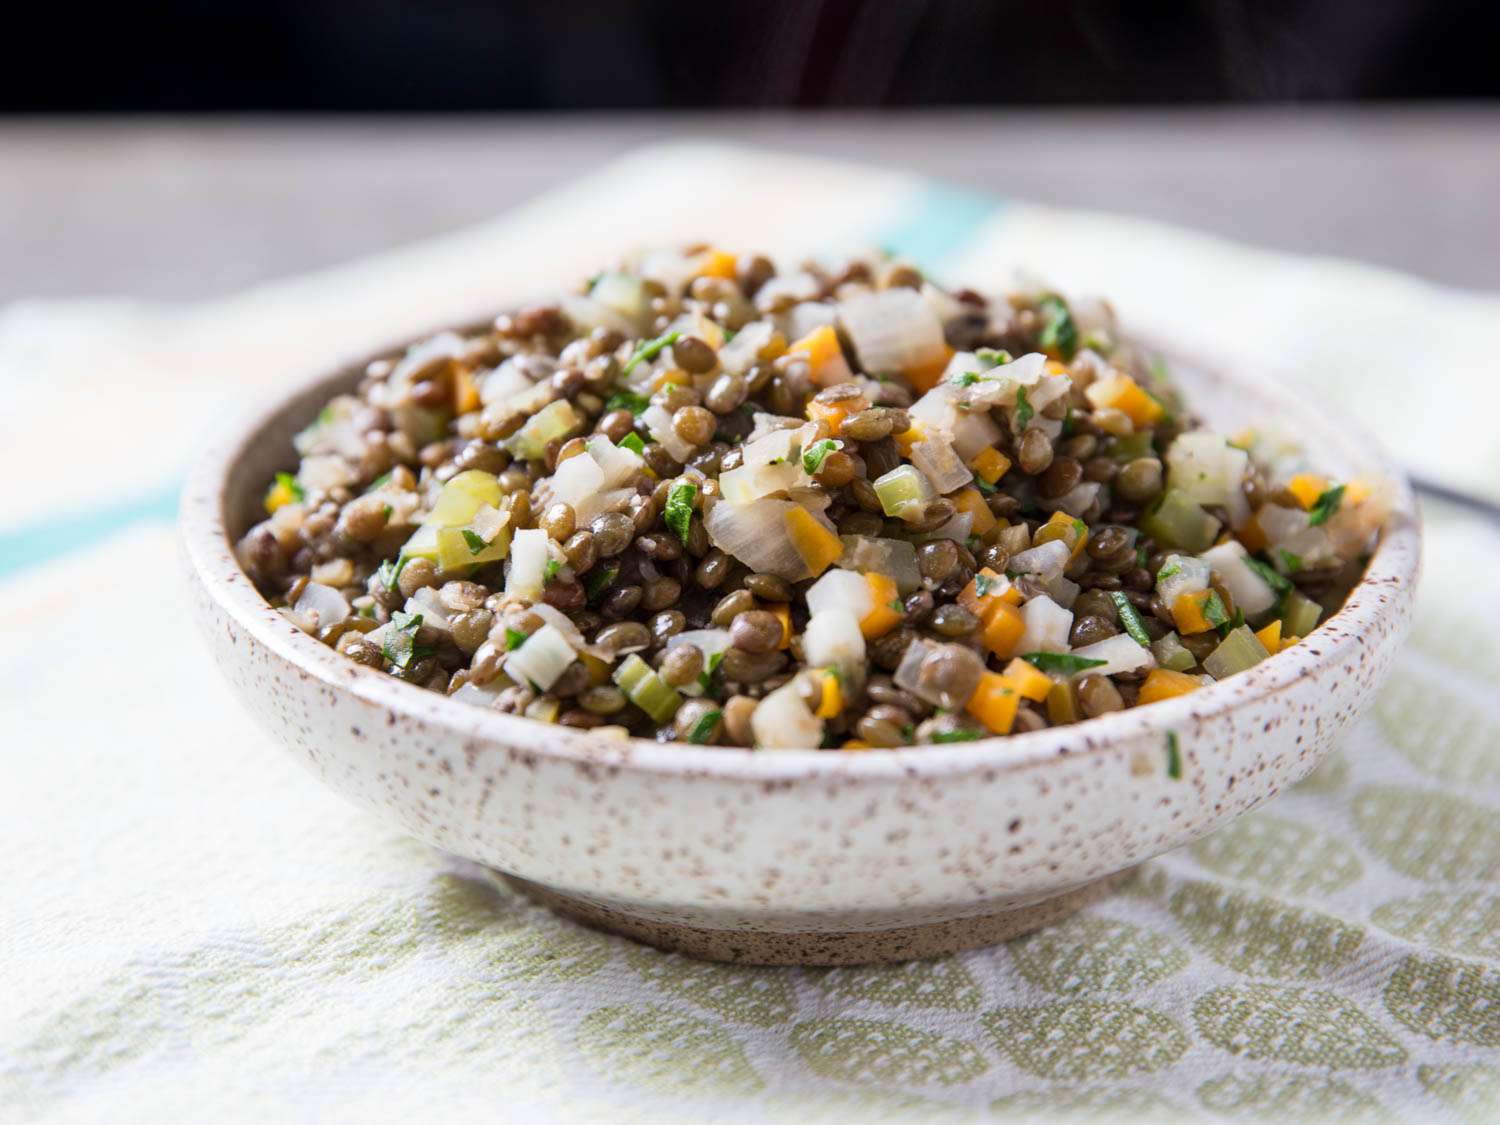 A bowl of French lentils with carrot, celery, onion, garlic and herbs